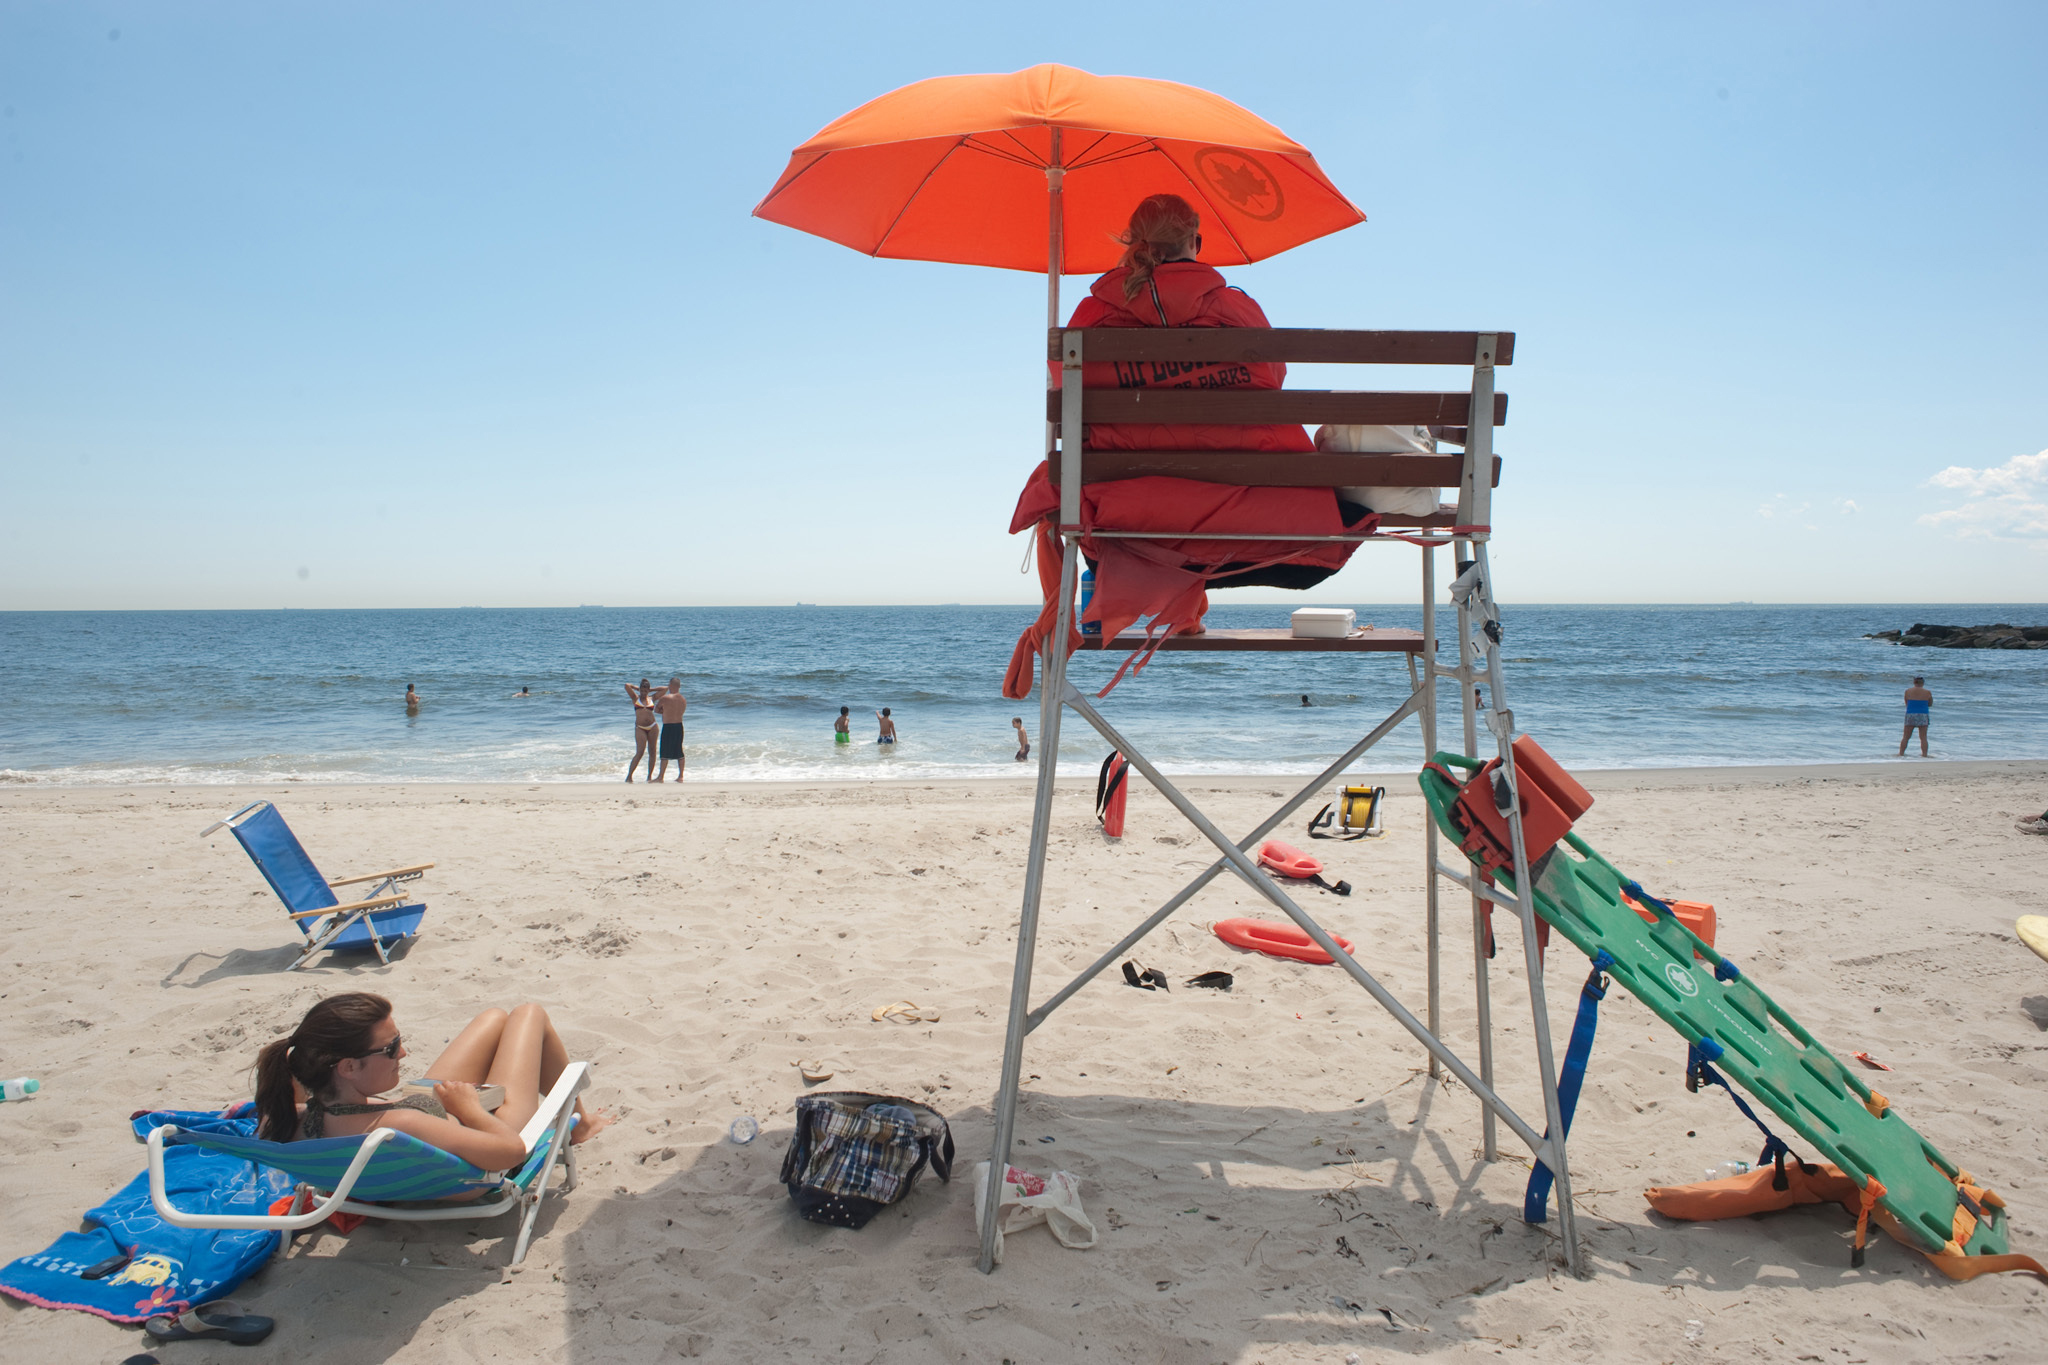 The Ultimate Guide to New York's Far Rockaway Beach: Where to Eat